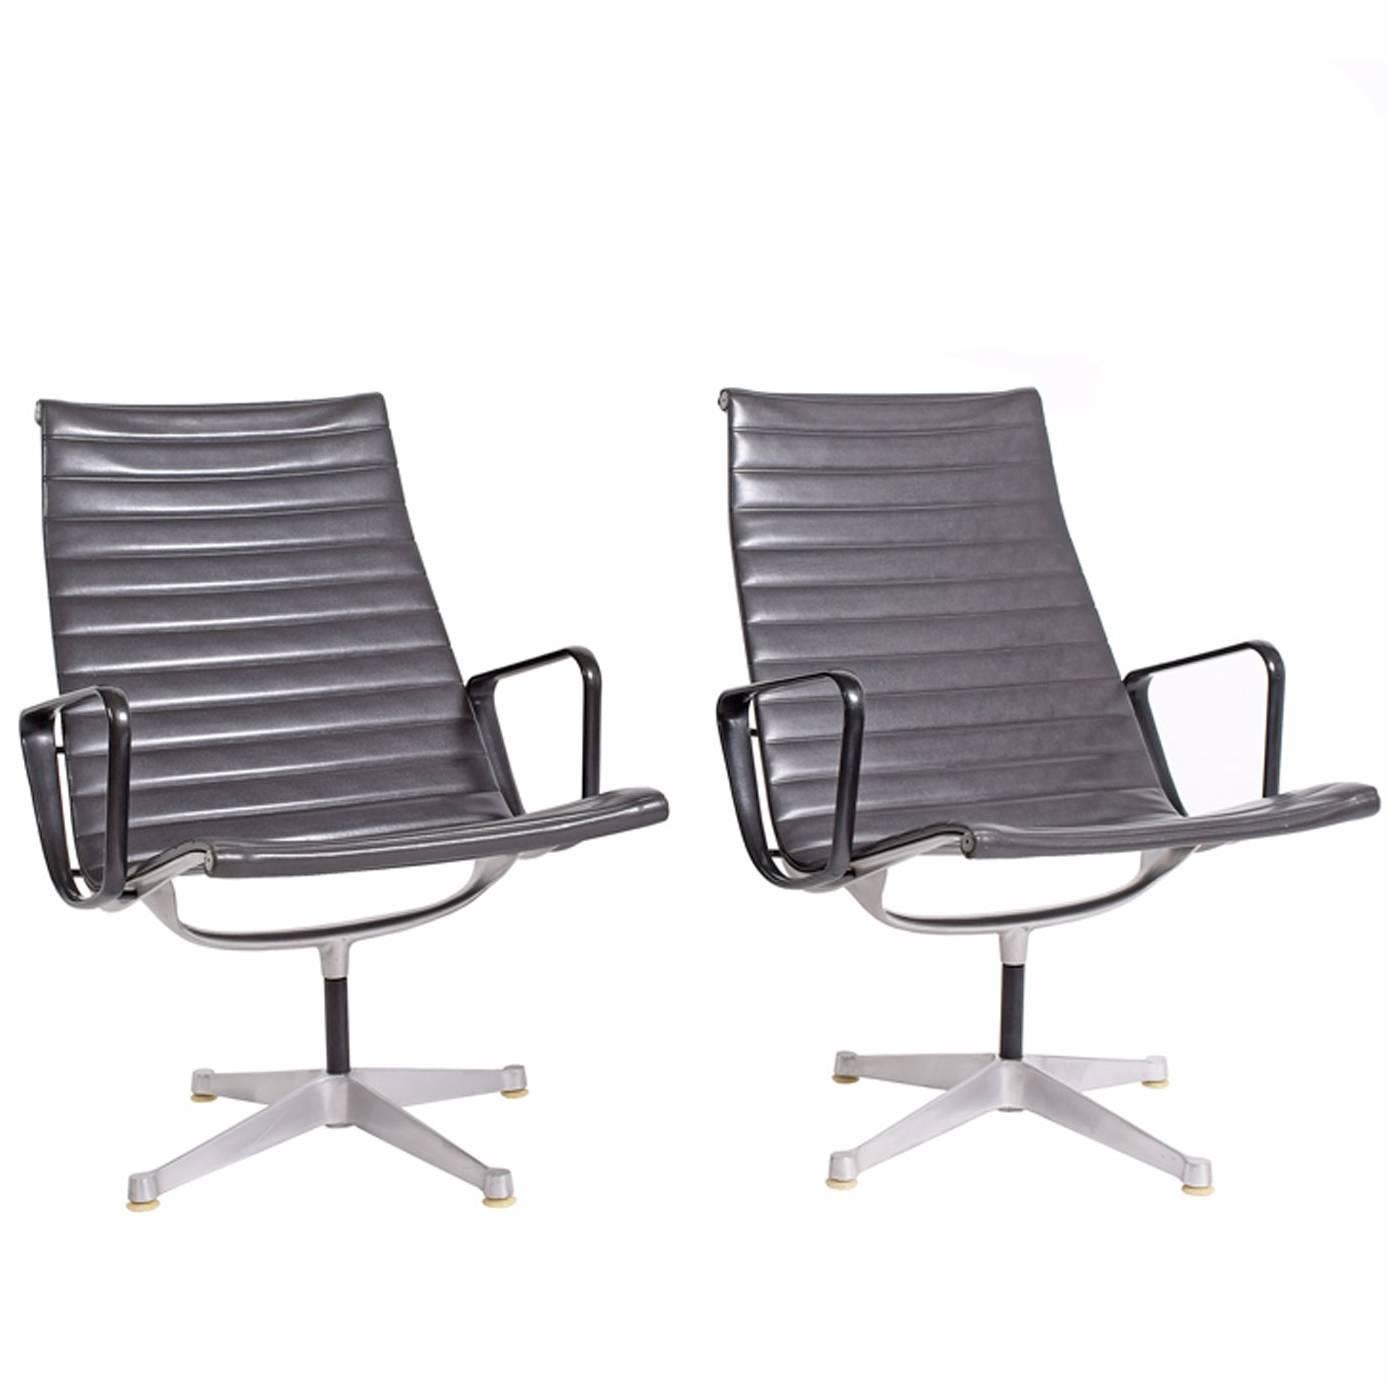 Early Production Aluminum Group Lounge Chairs by Charles Eames